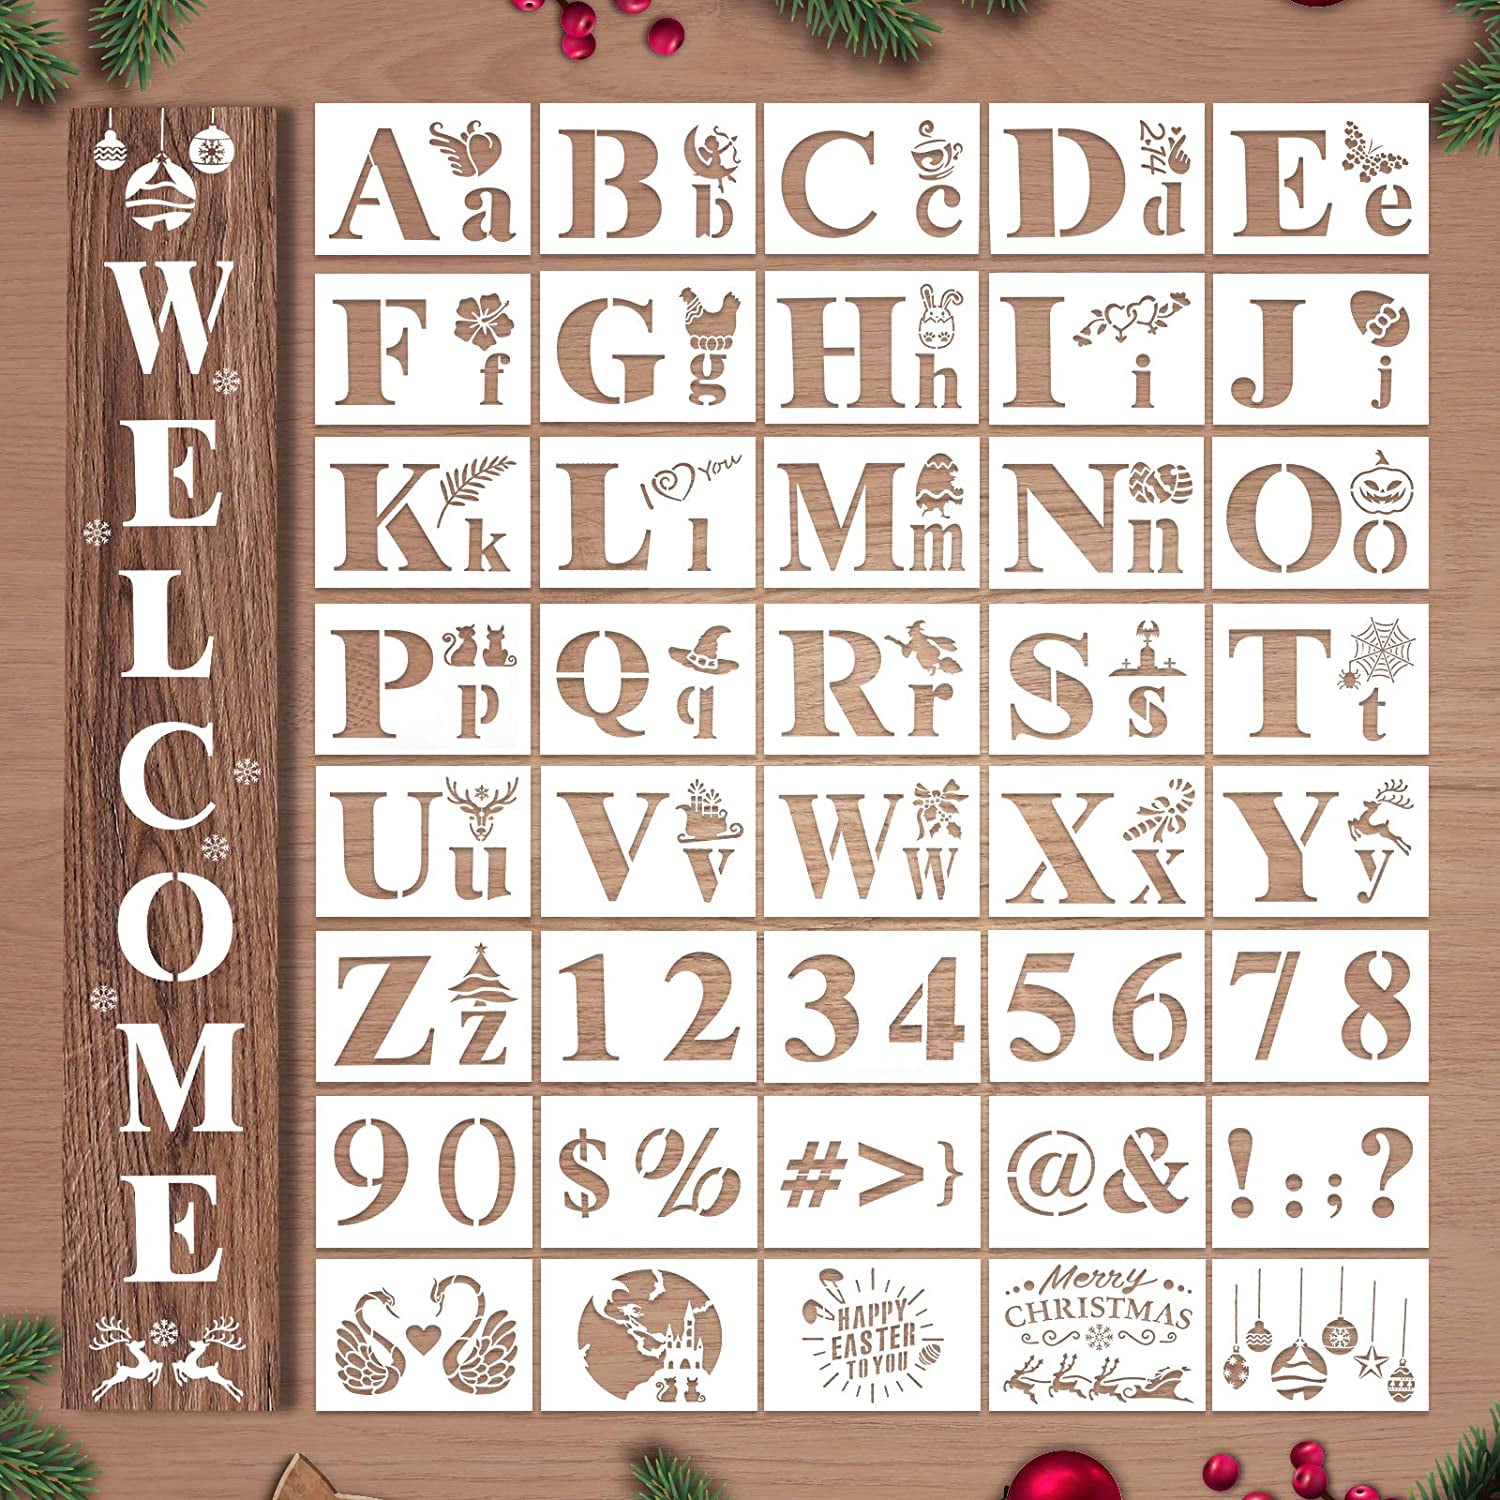 Vistreck 62pcs 3 Inch Letter and Number Stencils Reusable Washable Alphabet  Stencils Environment-friendly PET Art Craft Templates for Painting On Wood  Fabric Wall Door Decor Home Sign 